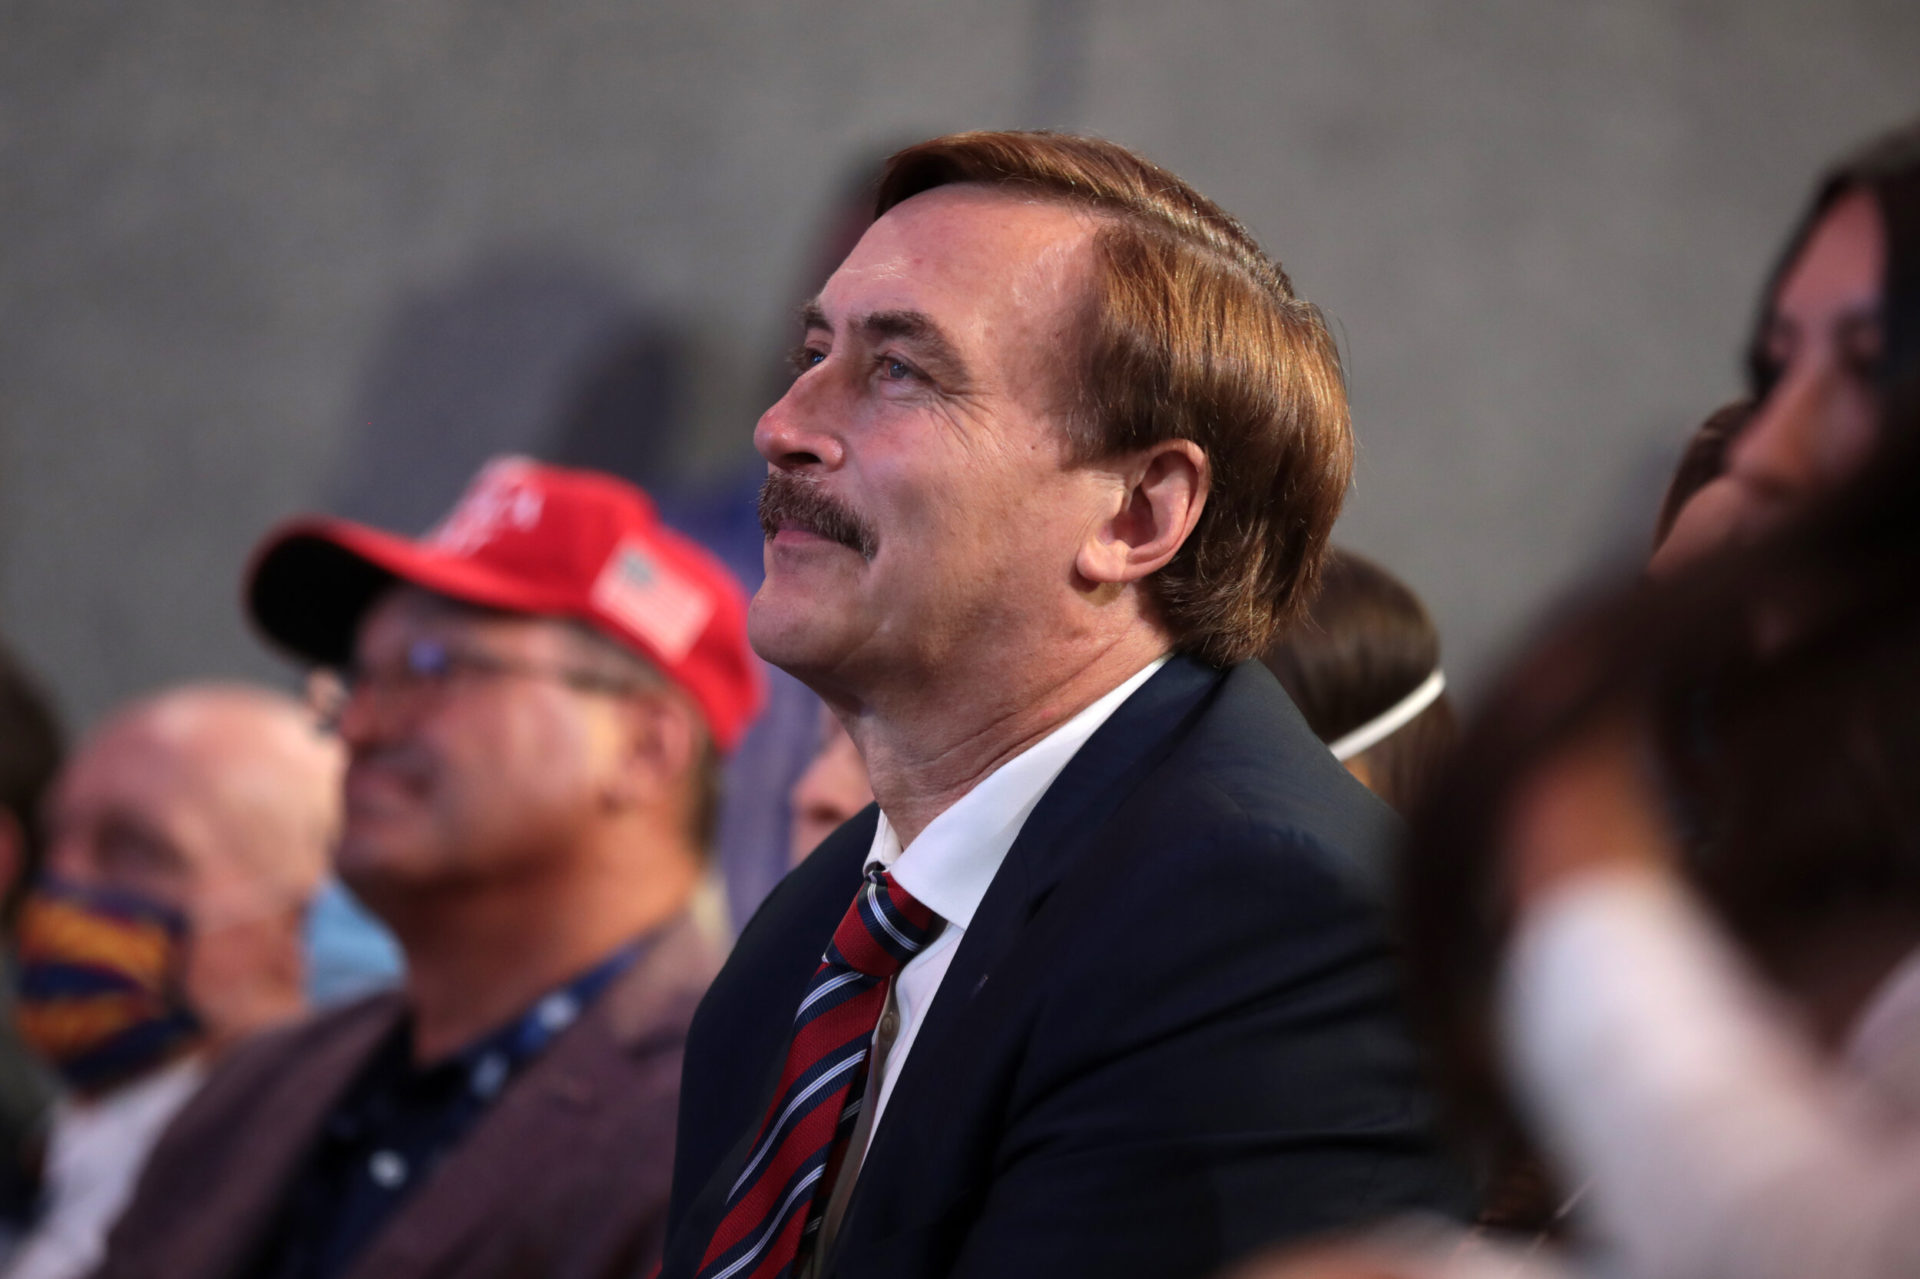 June 23, 2020 – Mike Lindell at "An Address to Young Americans" event, featuring President Donald Trump, hosted by Students for Trump and Turning Point Action at Dream City Church in Phoenix, Arizona. (Photo by Gage Skidmore | Wikimedia Commons)